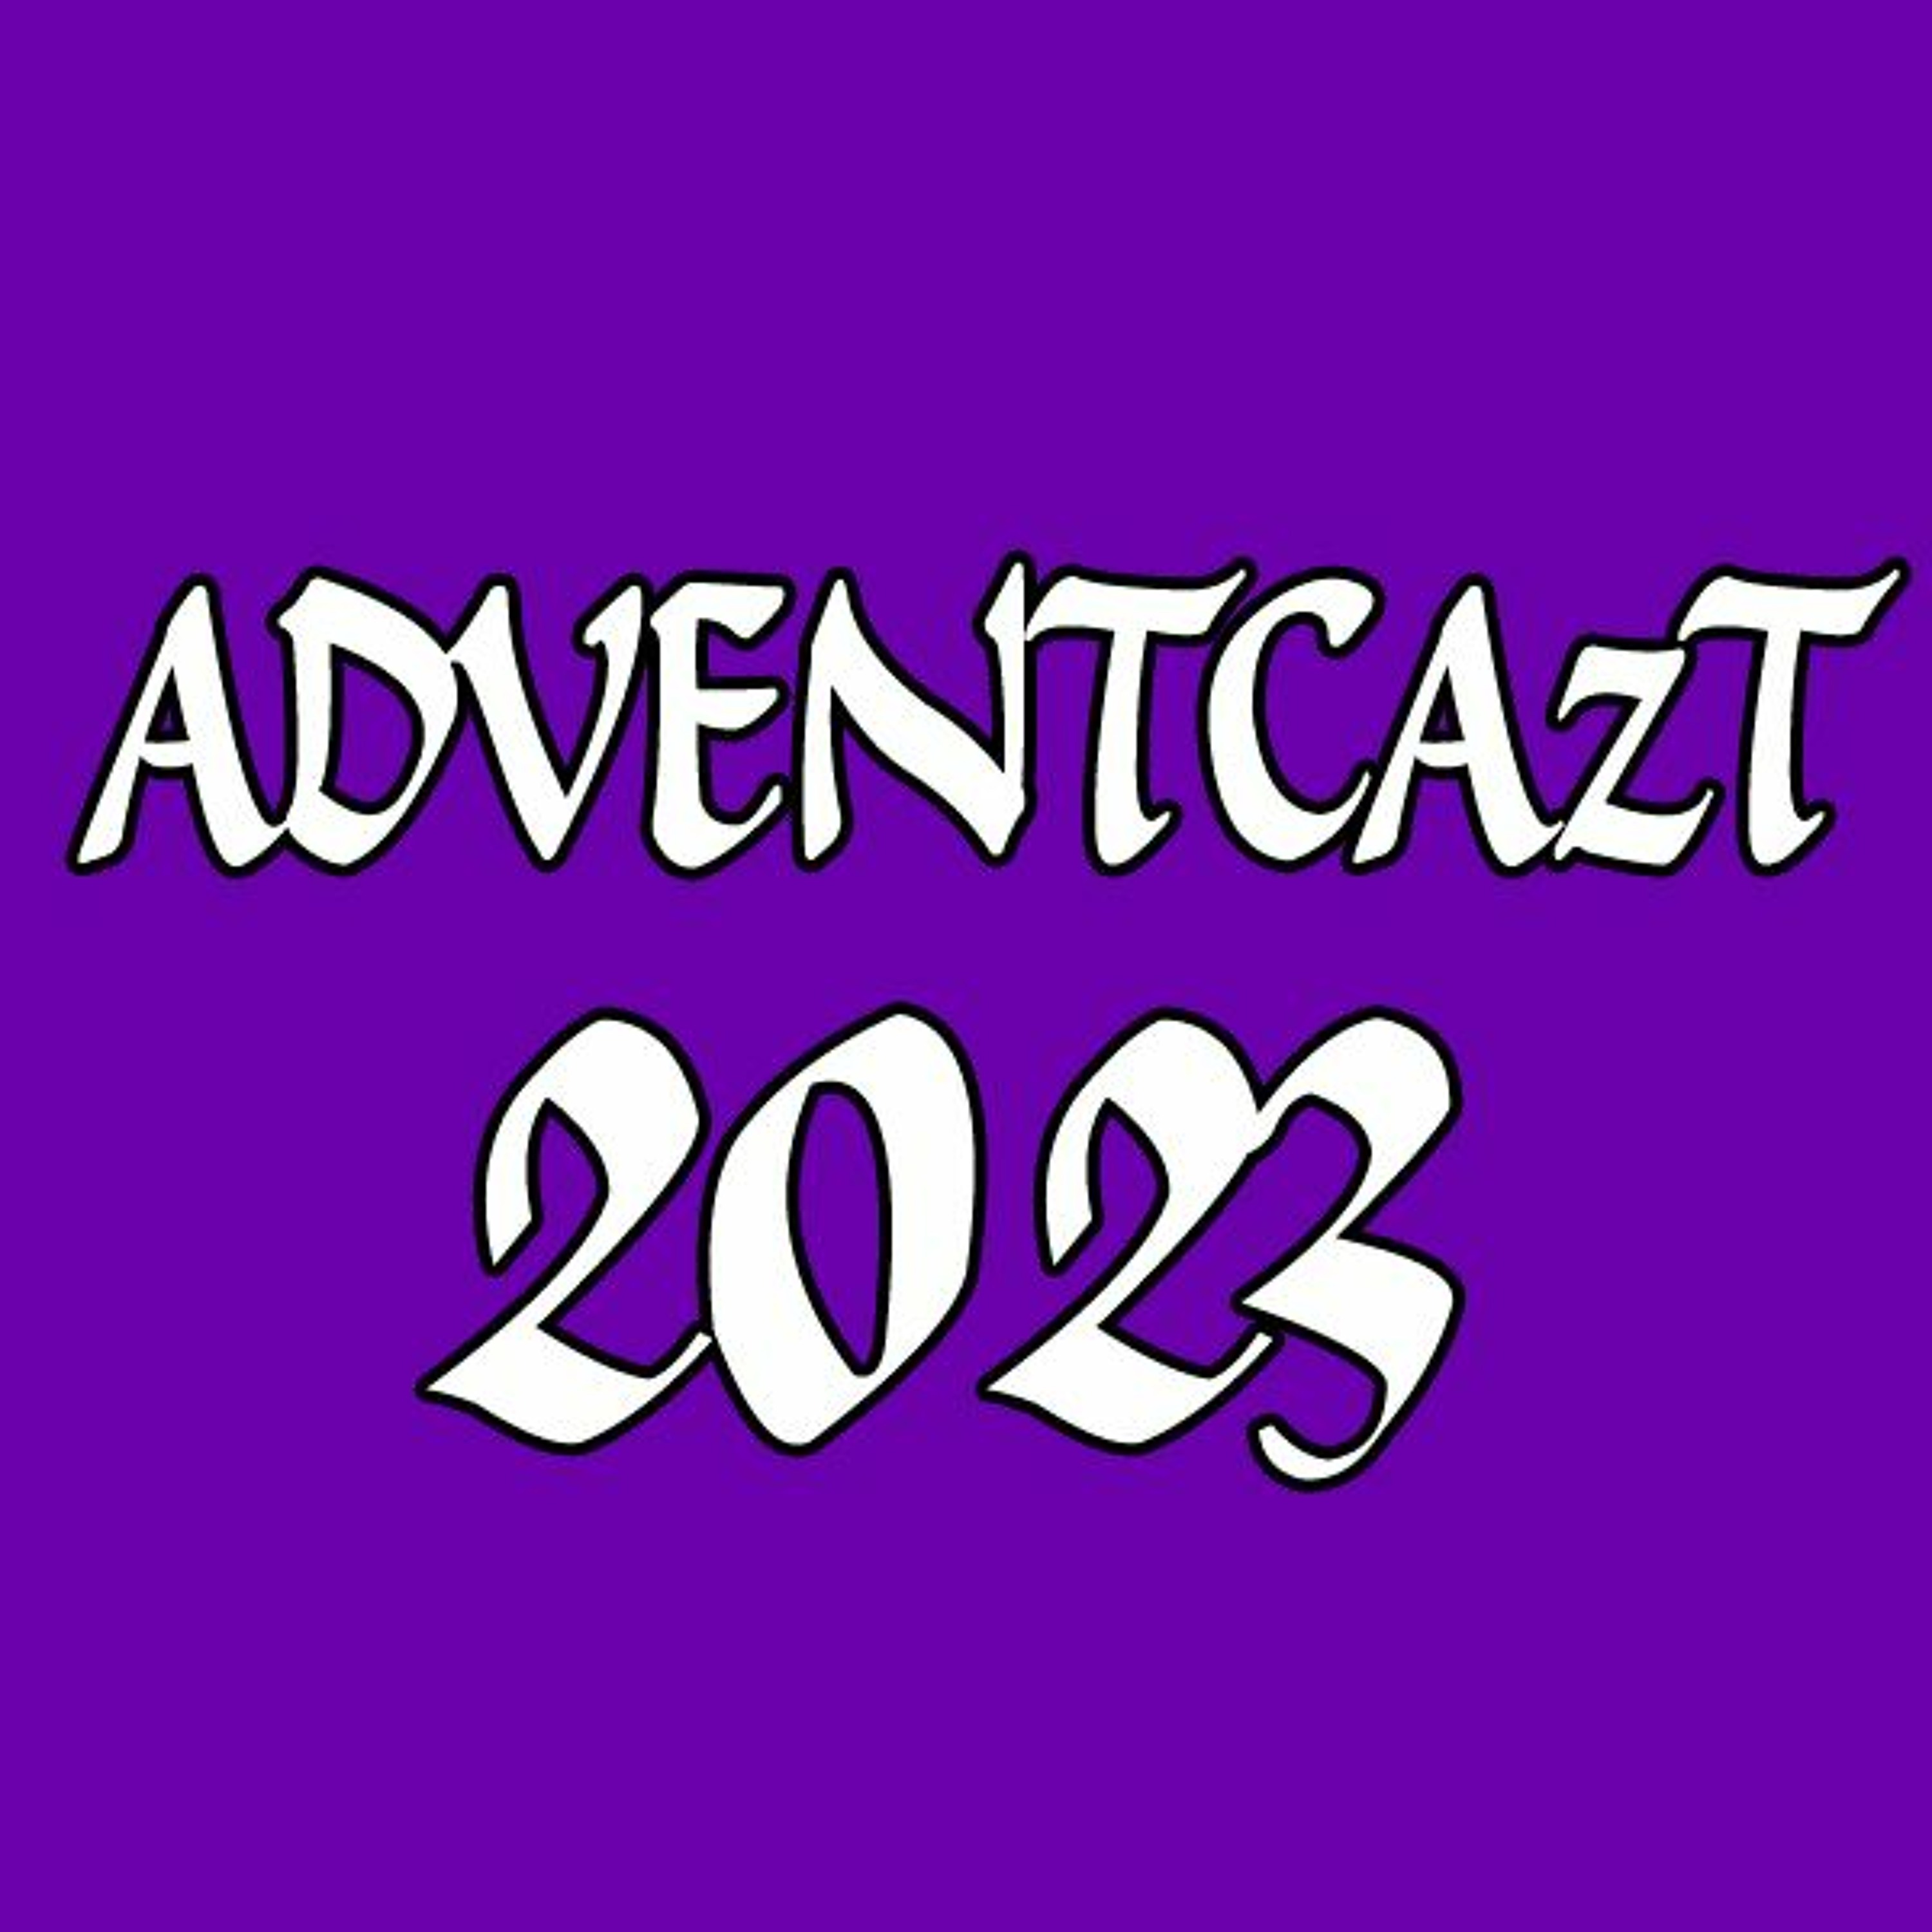 ADVENTCAzT 2023 – 14 – Saturday 2nd Week of Advent: Frequency